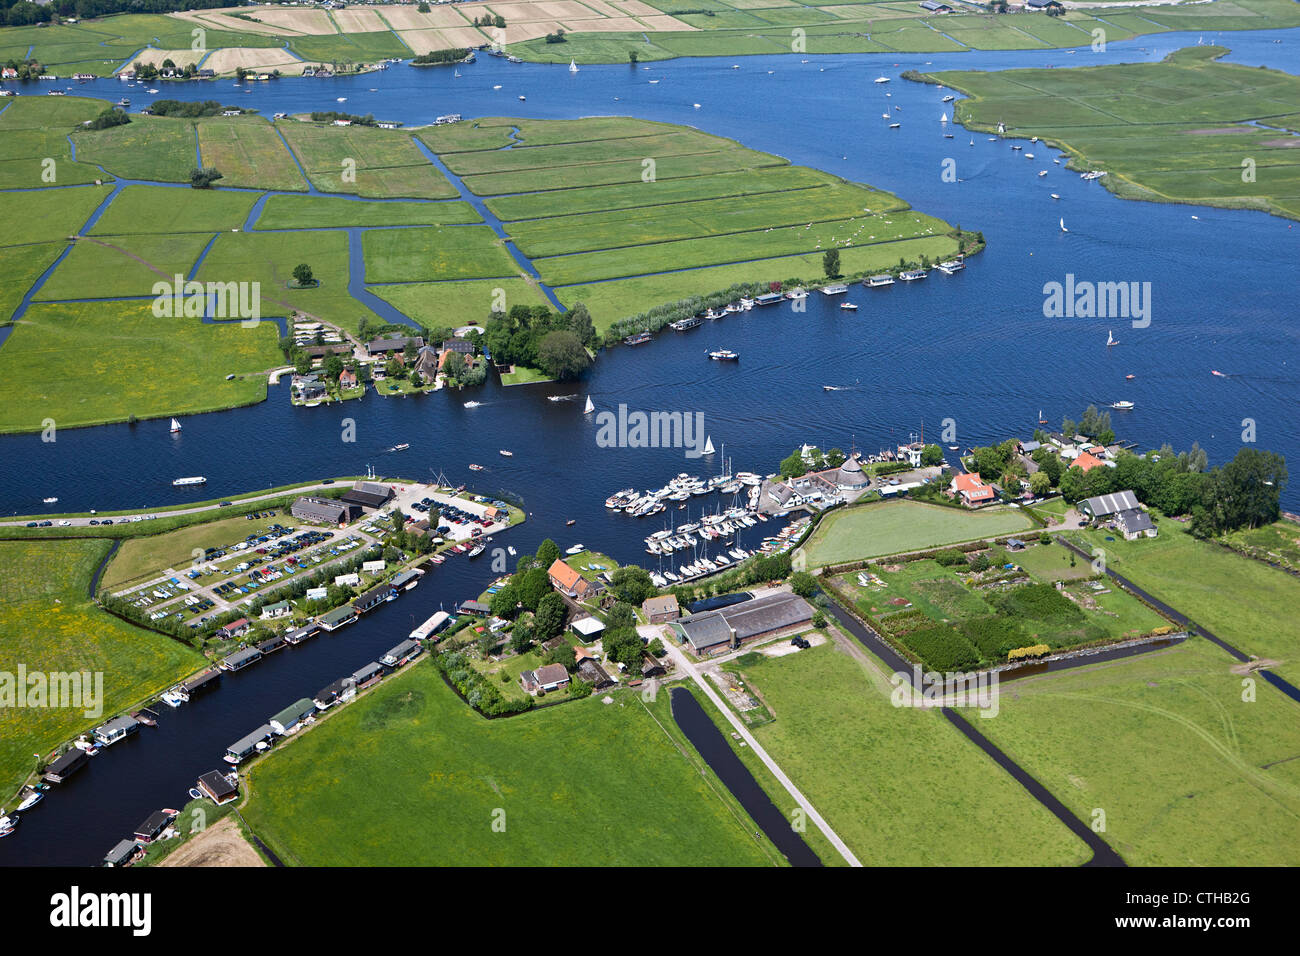 the-netherlands-warmond-yachts-in-lakes-called-kagerplassen-aerial-CTHB2G.jpg